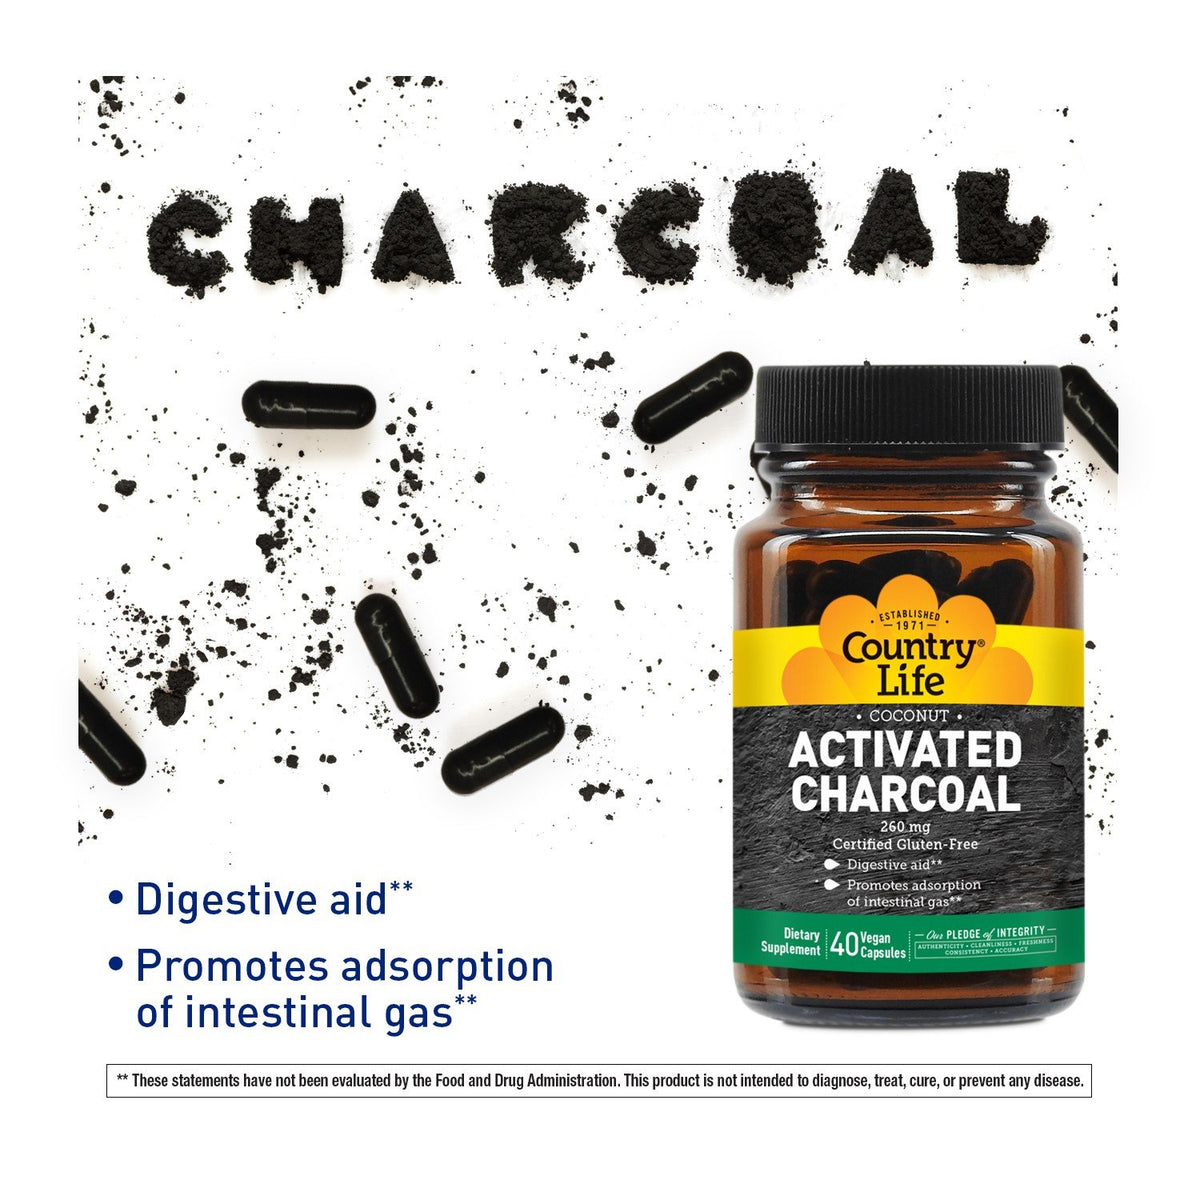 Country Life Activated Charcoal 260mg 40 VegCap